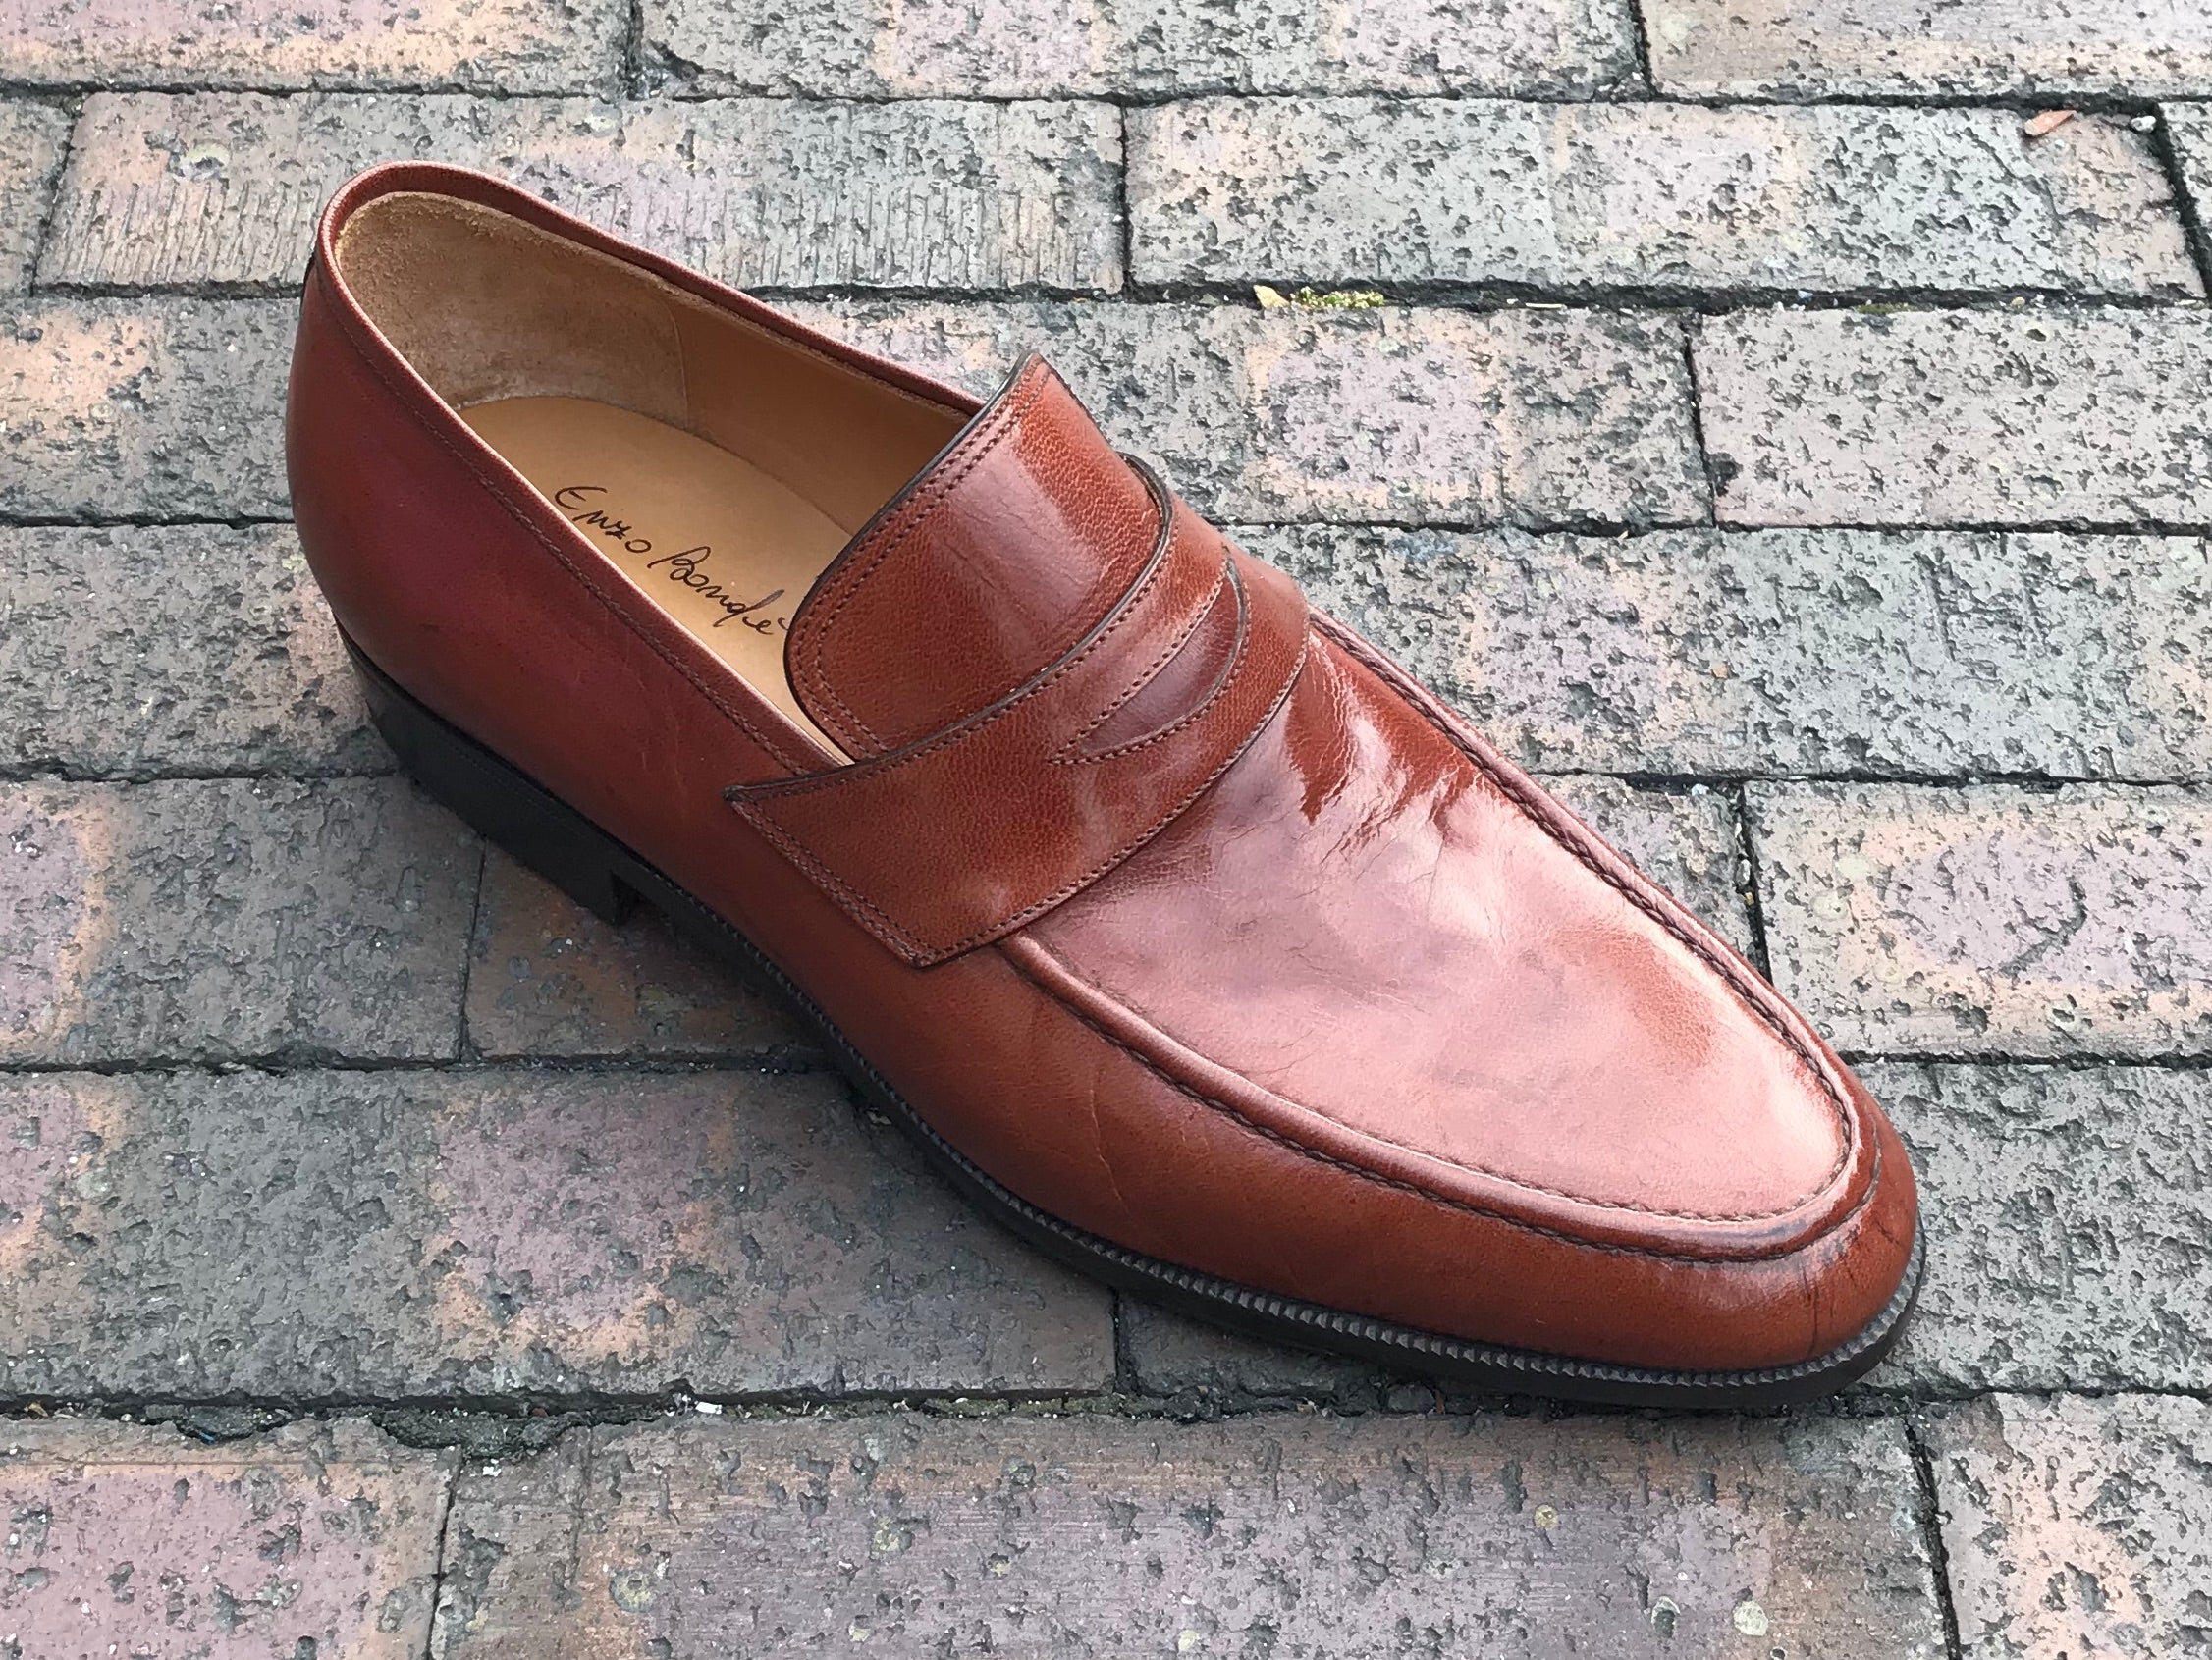 Enzo Bonafè Style 3699 Loafer - Made to Order – Mehra